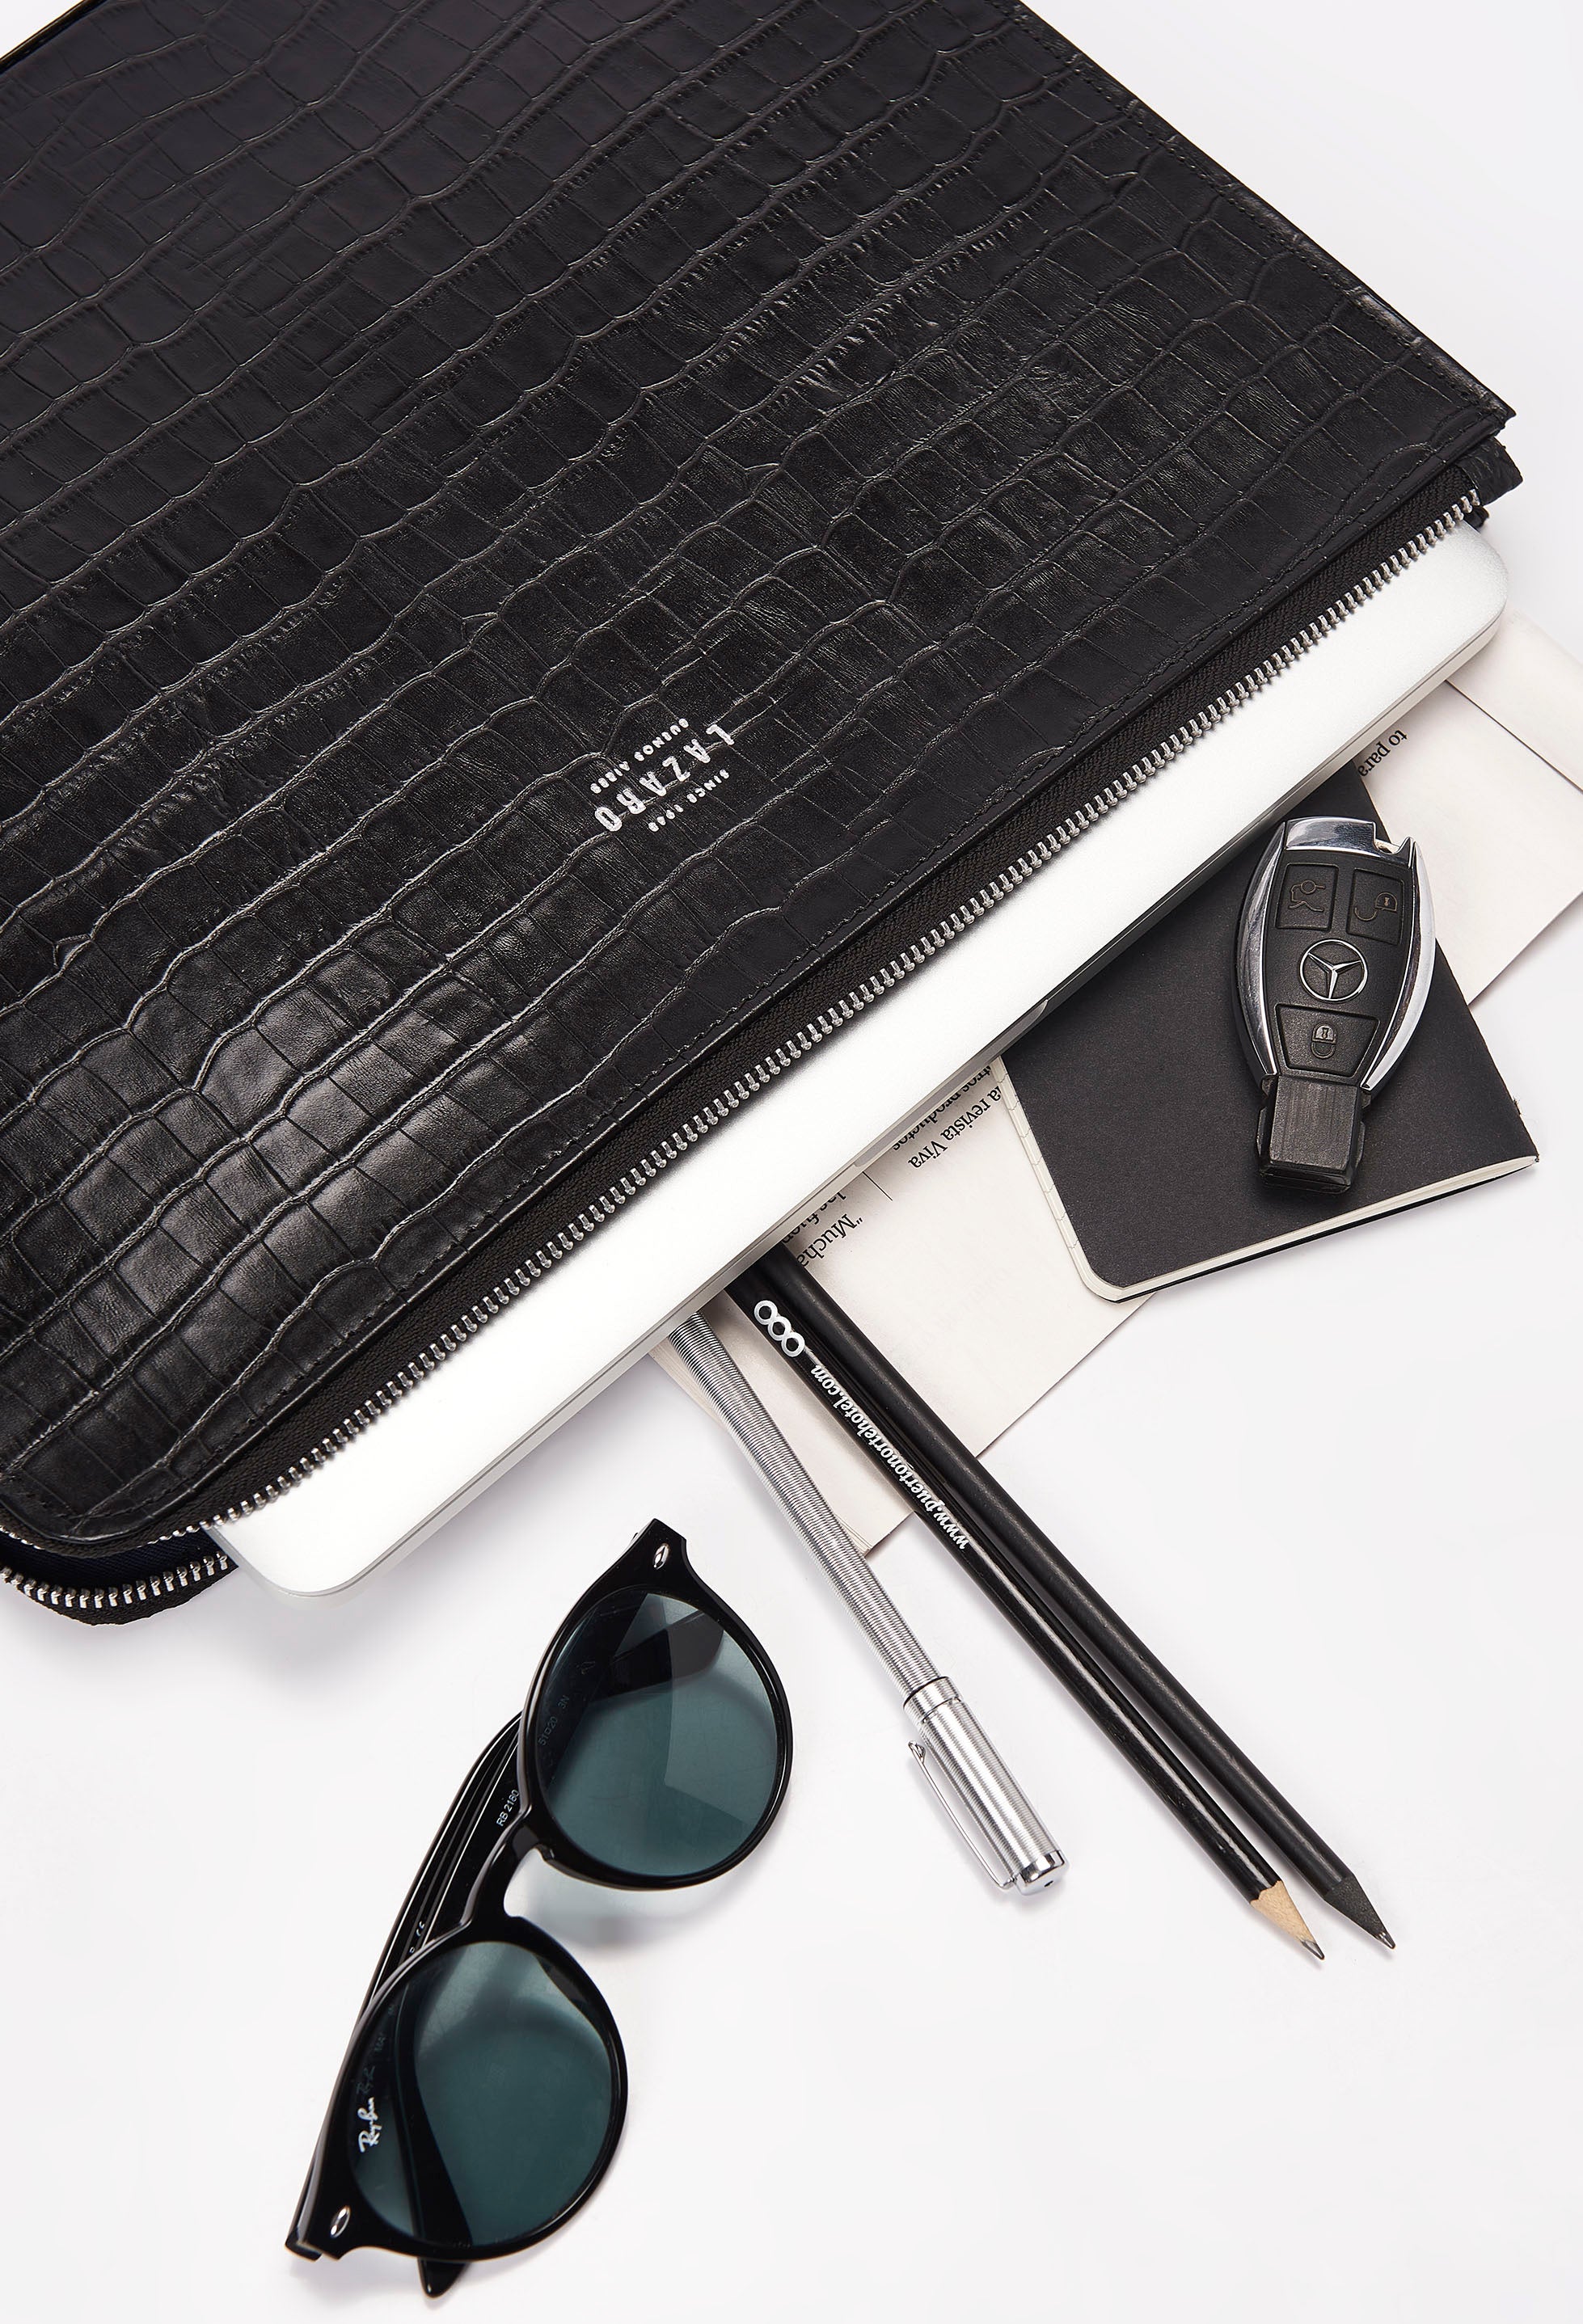 Partial photo of a Black Croco Leather Slim Computer Case that shows it can fit sunglasses, pencils and pens, notebooks, car keys and a computer.